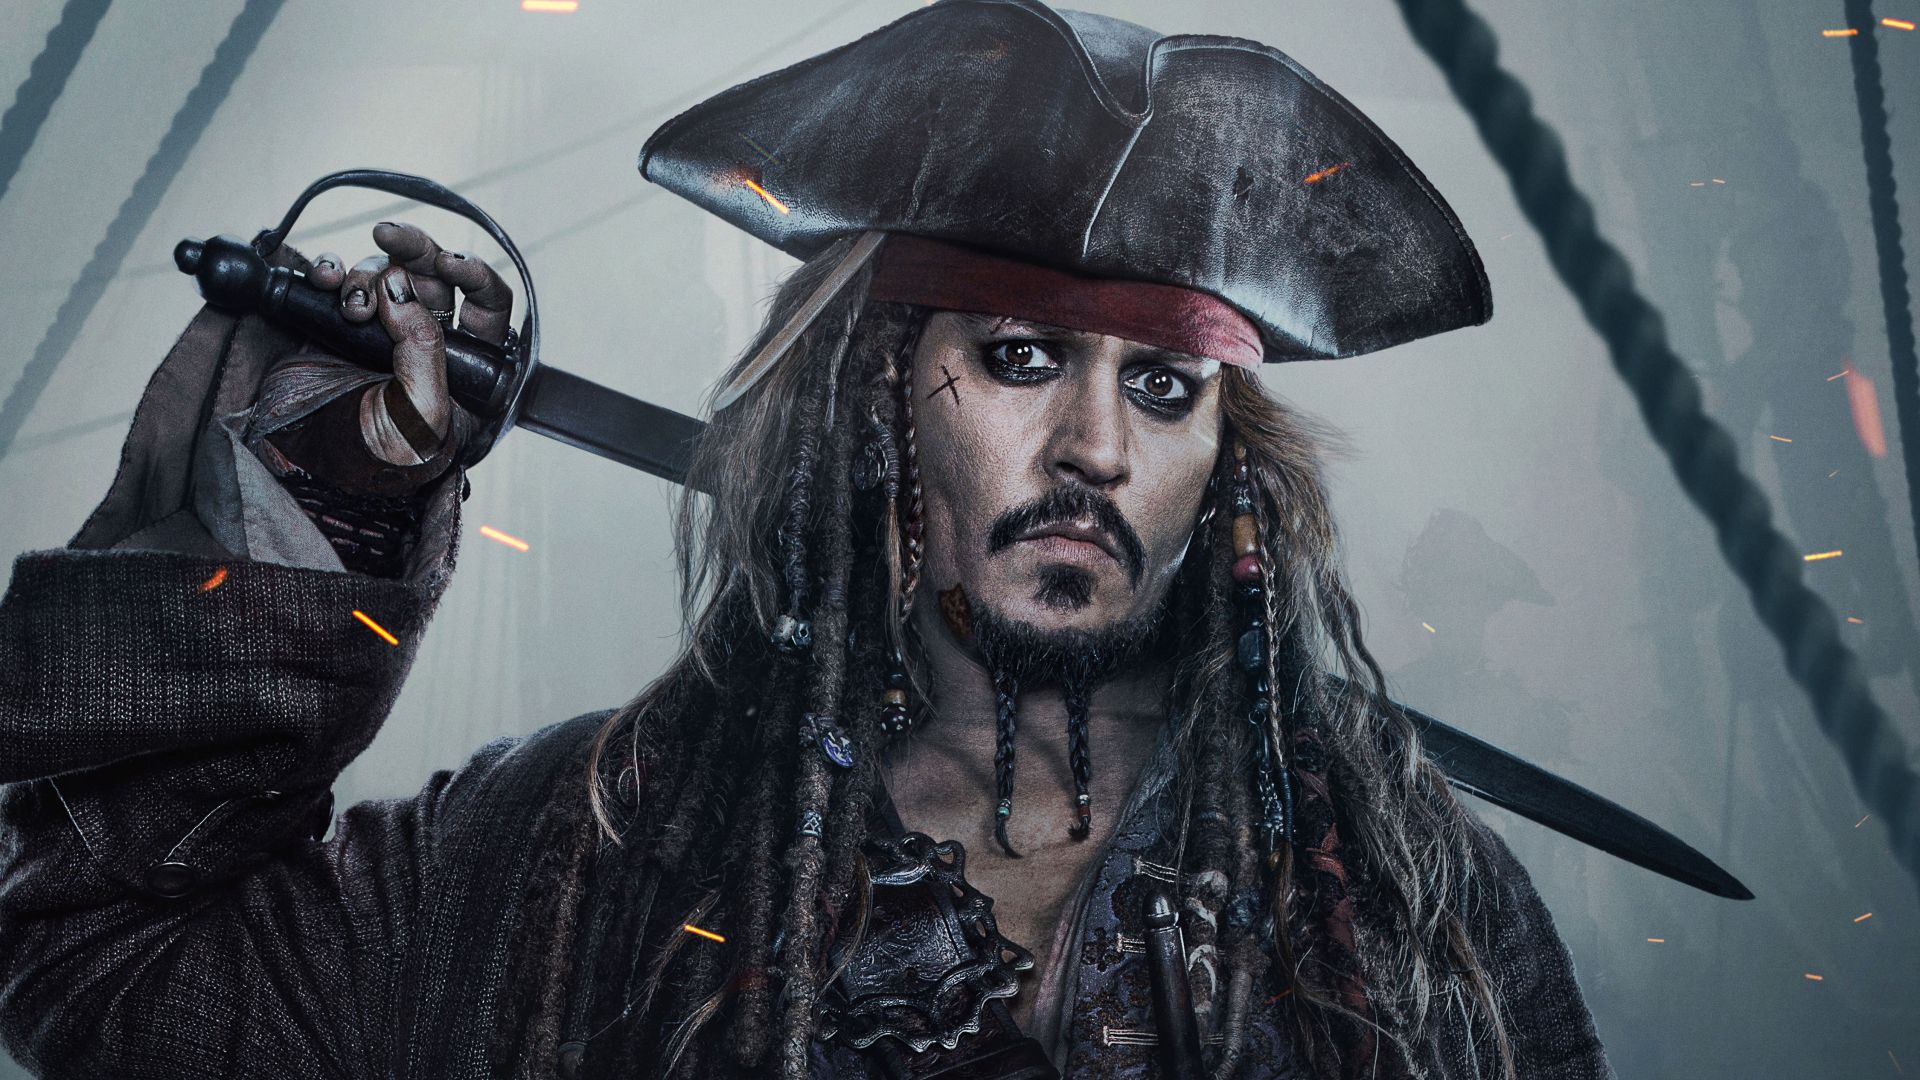 Wallpaper Jack Sparrow in Pirates of the Caribbean: Dead Men Tell No Tales, movie, 4k